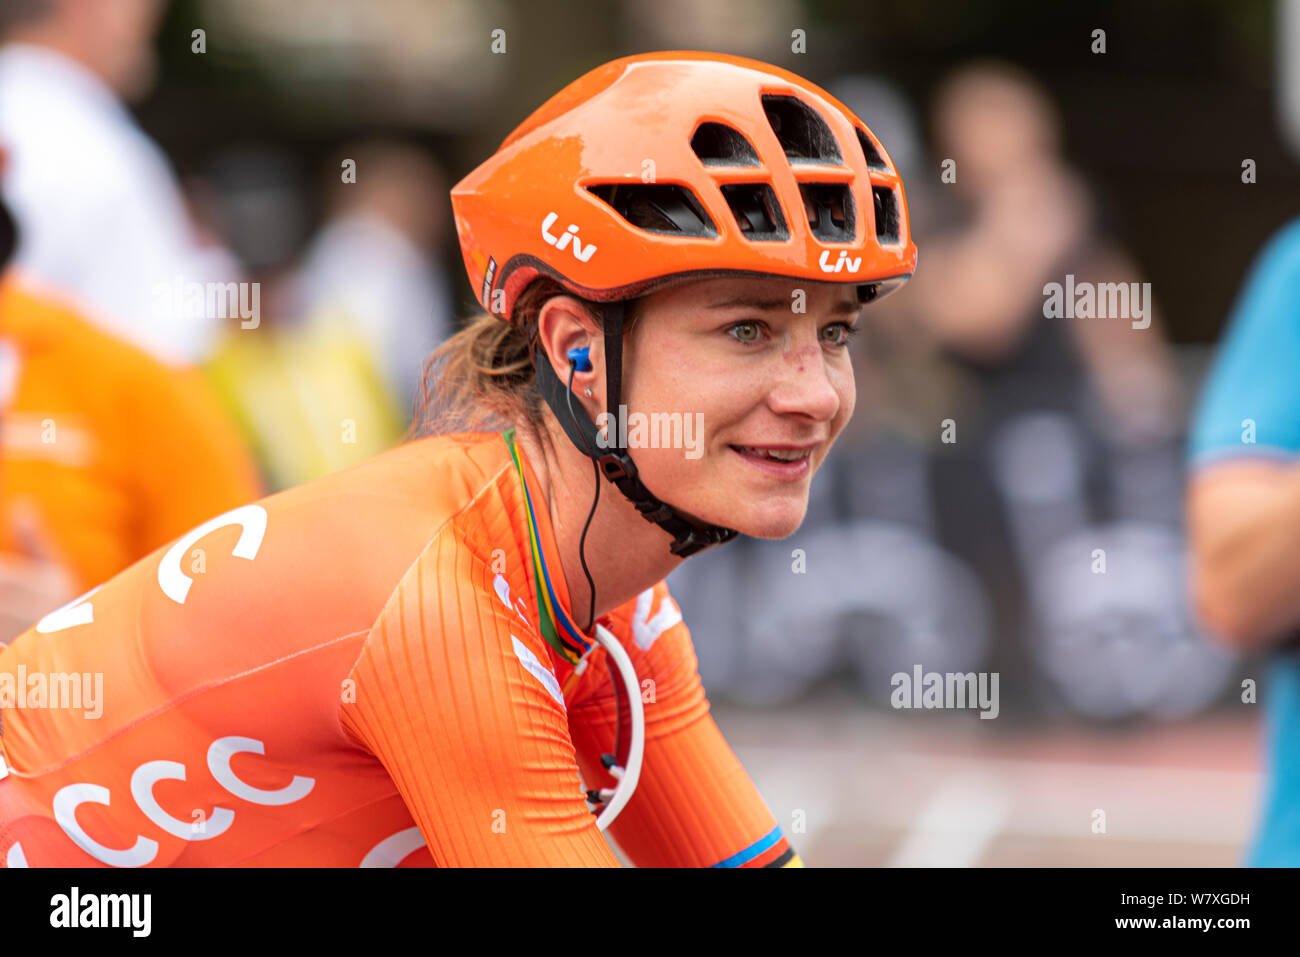 Marianne Vos of team CCC Liv before racing in the Prudential RideLondon Classique cycle race. Female cyclist rider Stock Photo